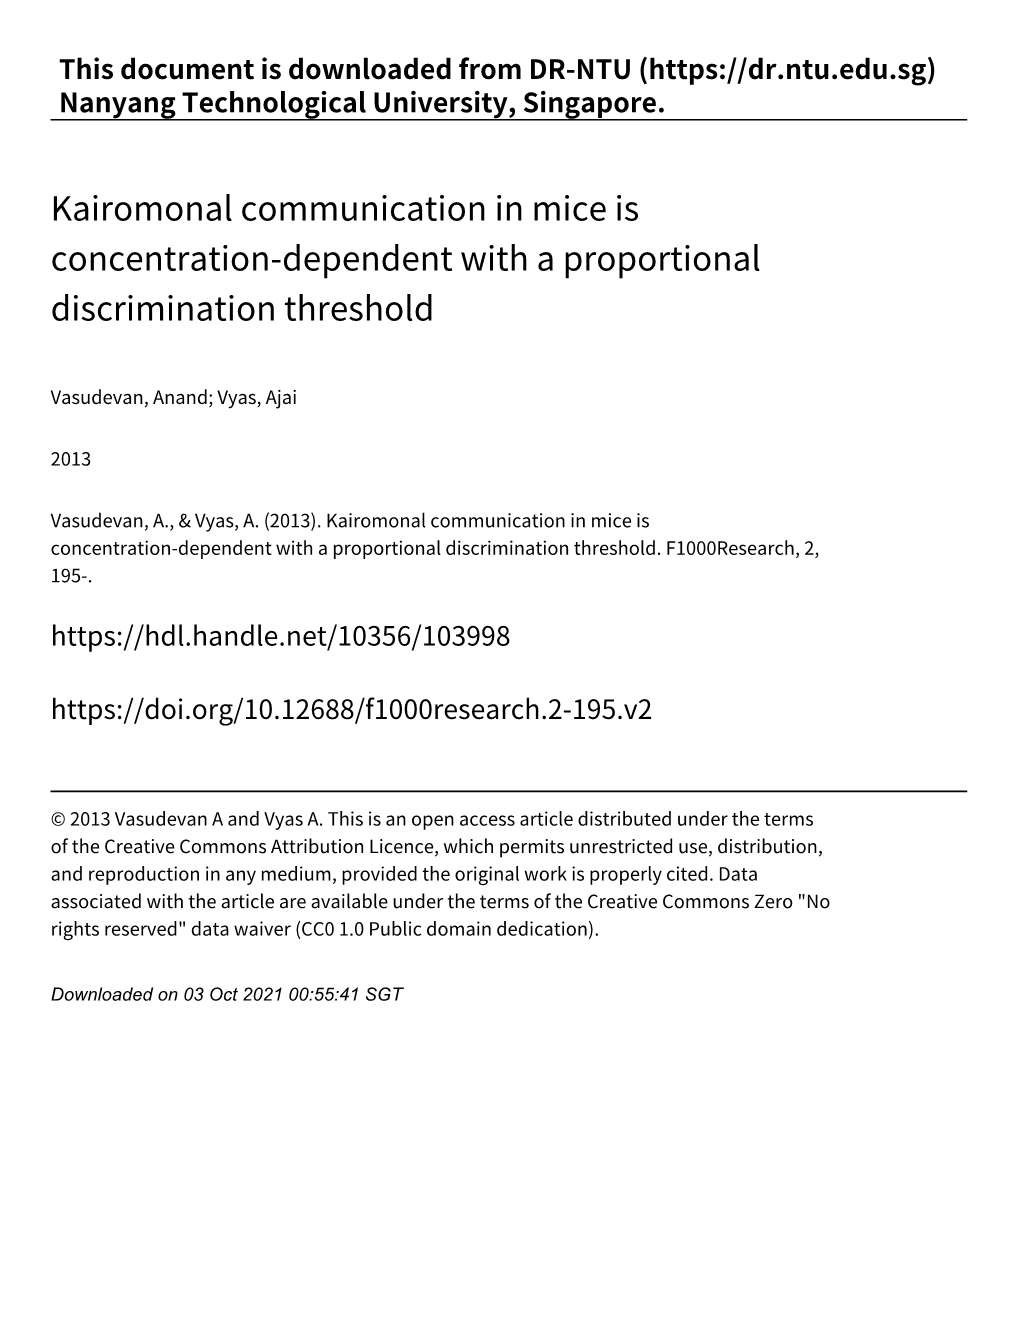 Kairomonal Communication in Mice Is Concentration‑Dependent with a Proportional Discrimination Threshold